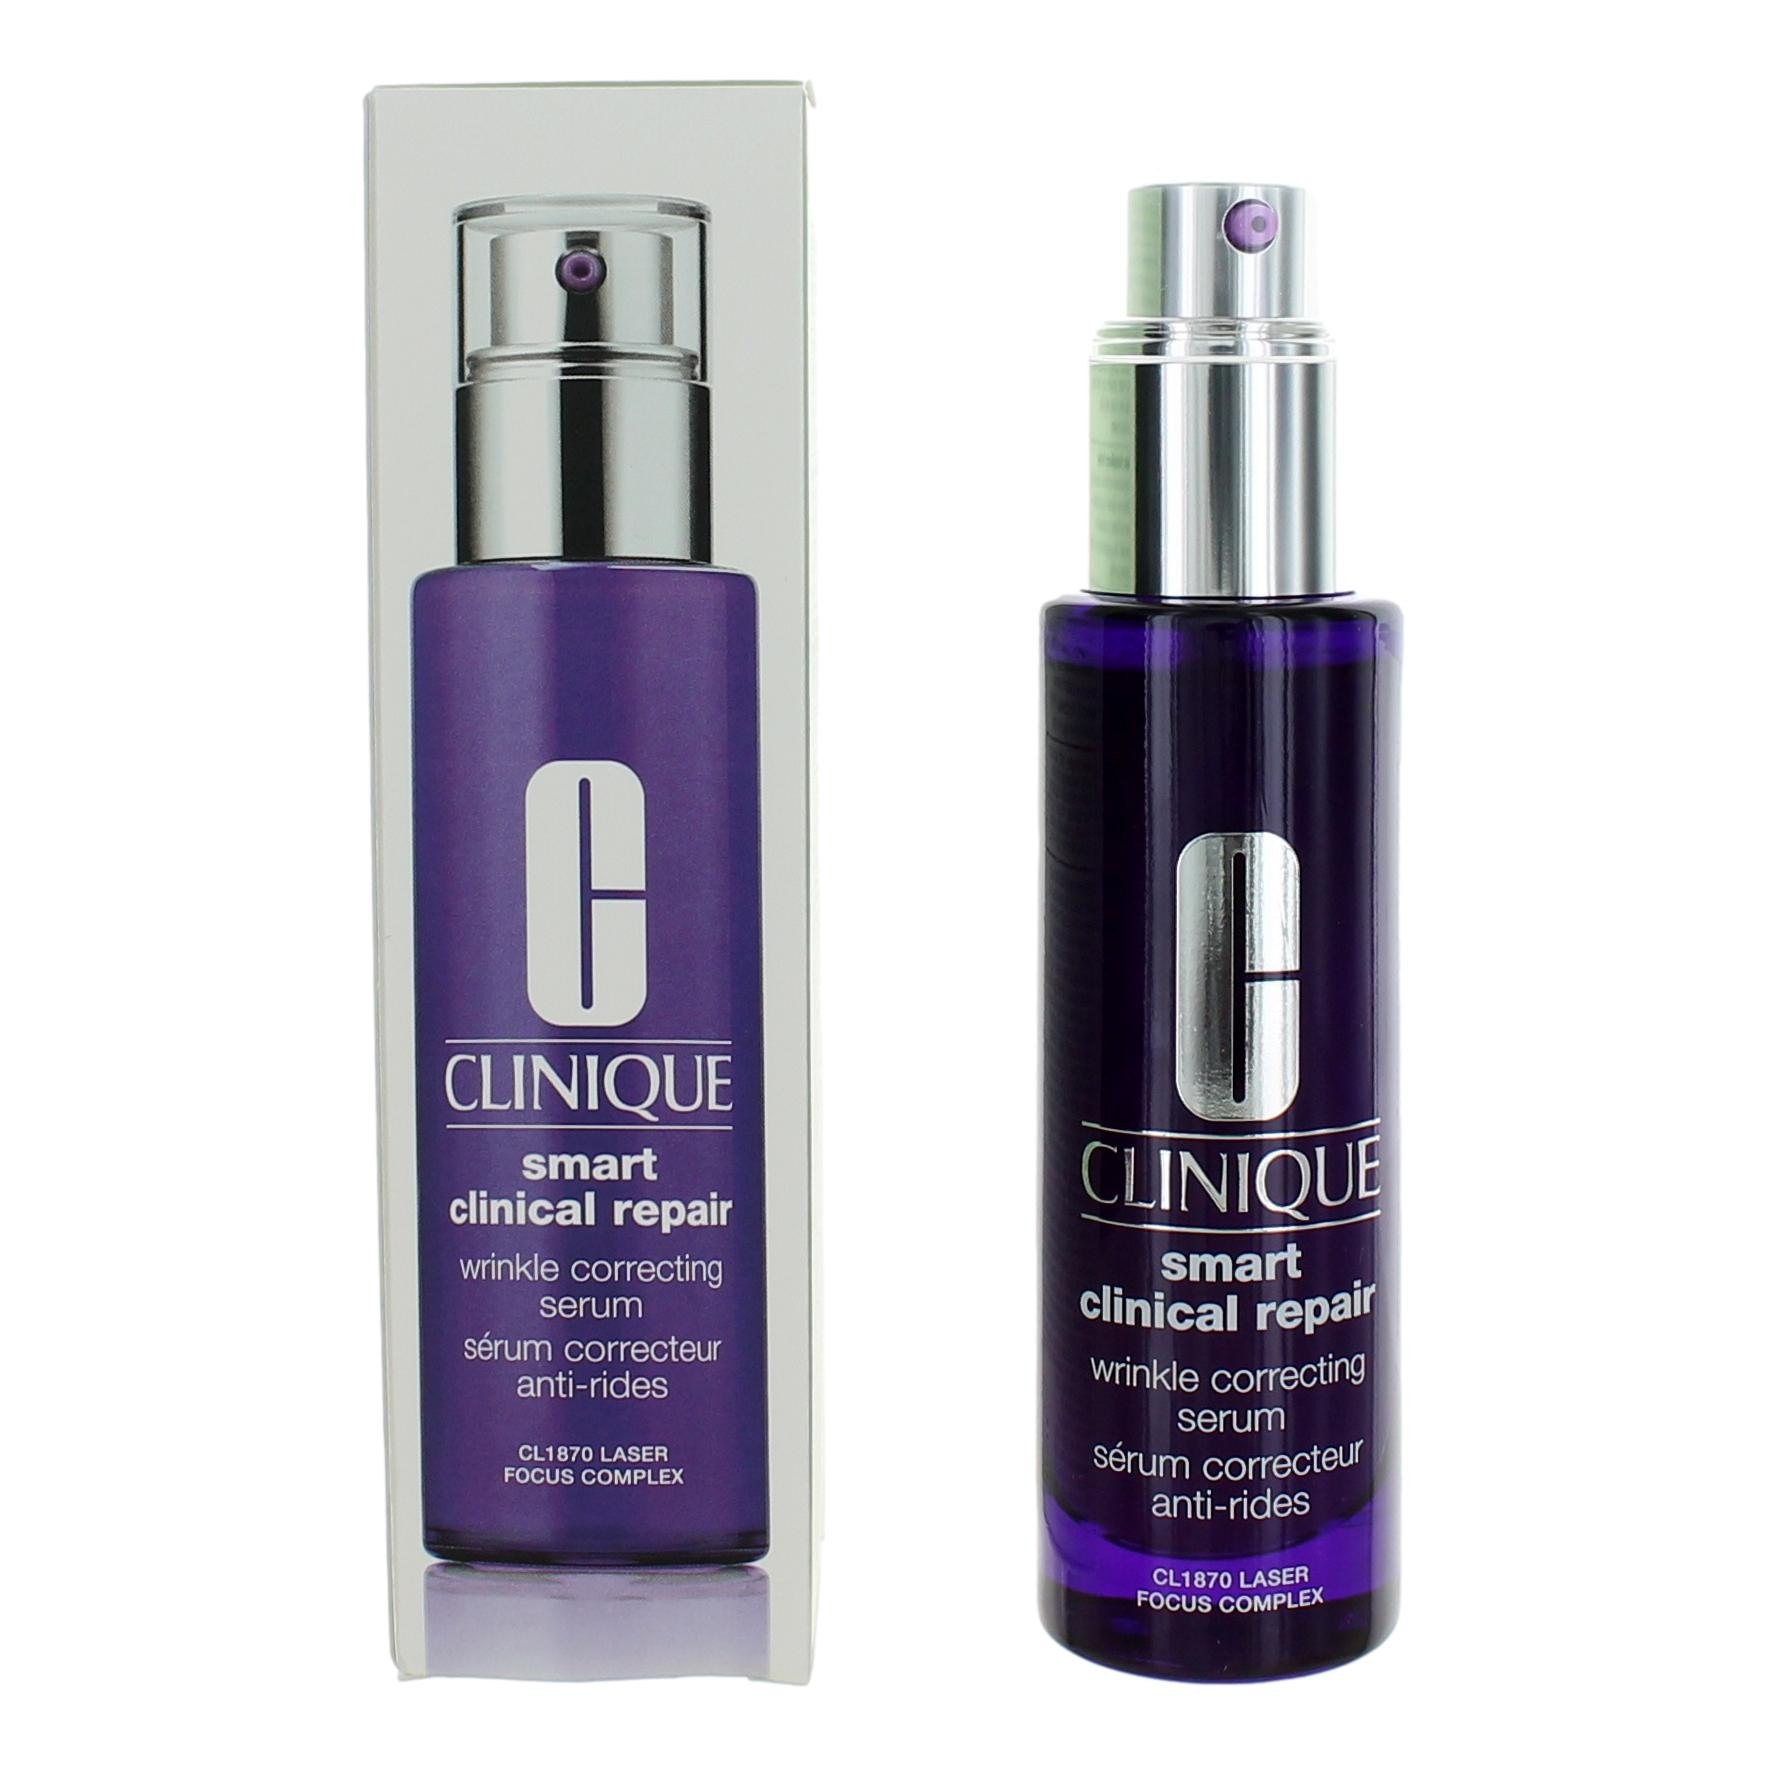 Clinque Smart Clinical Repair by Clinque 1.7 oz Wrinkle Correcting Serum